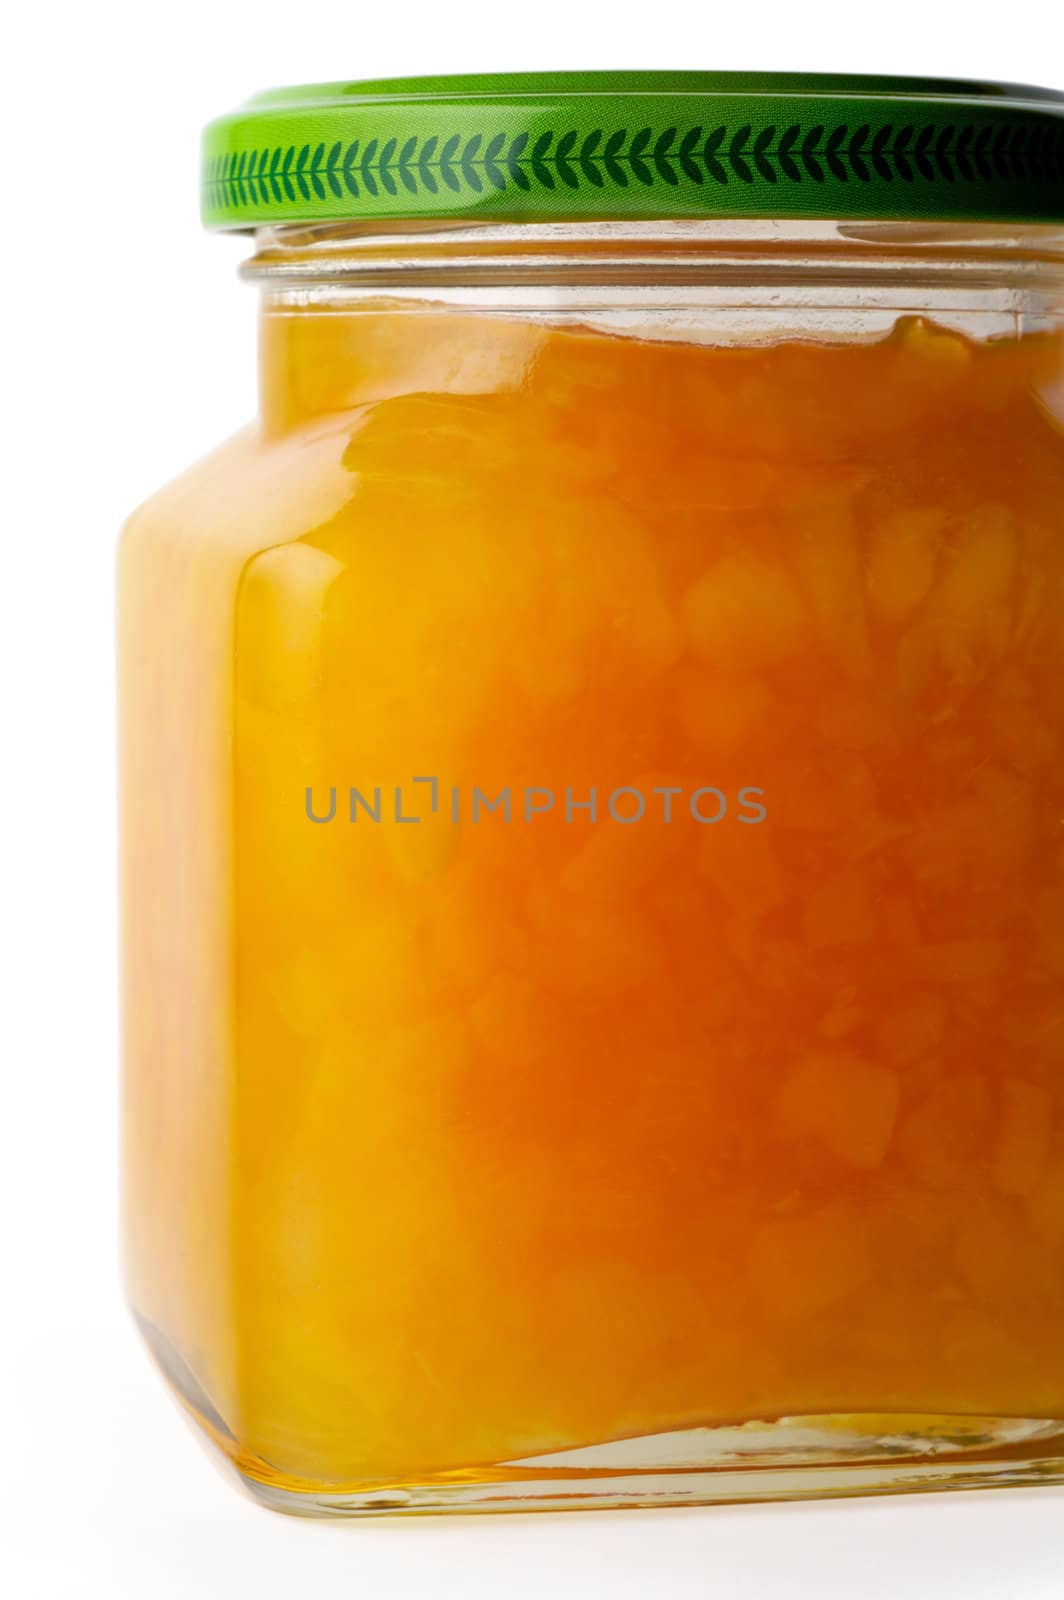 Peach jam on squared jar (1) with clipping path by Laborer